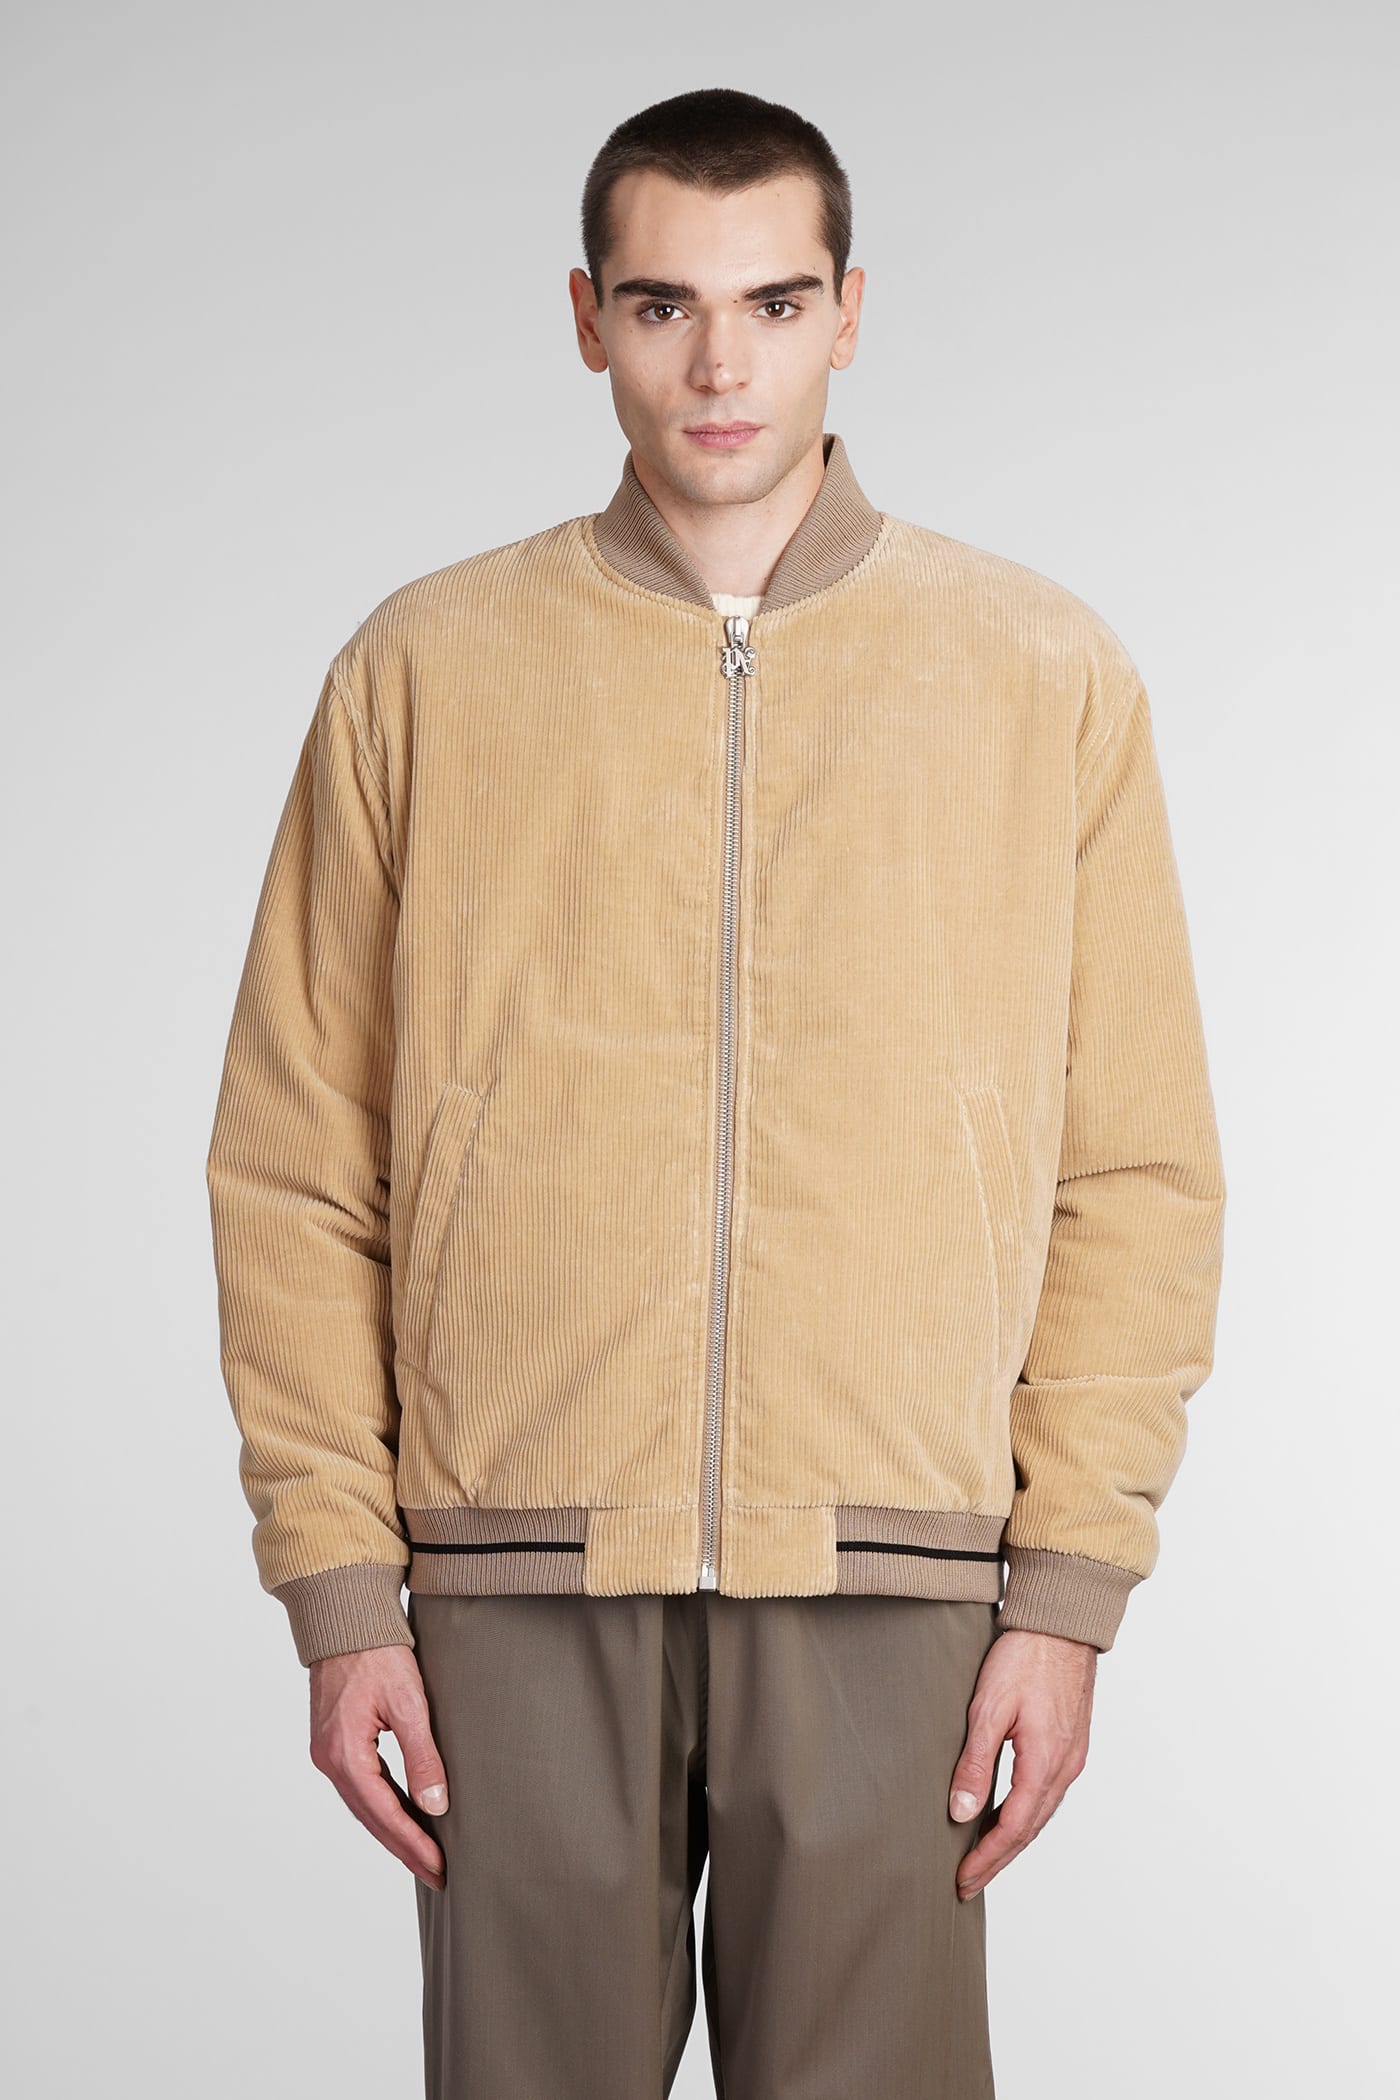 PALM ANGELS CASUAL JACKET IN BEIGE COTTON